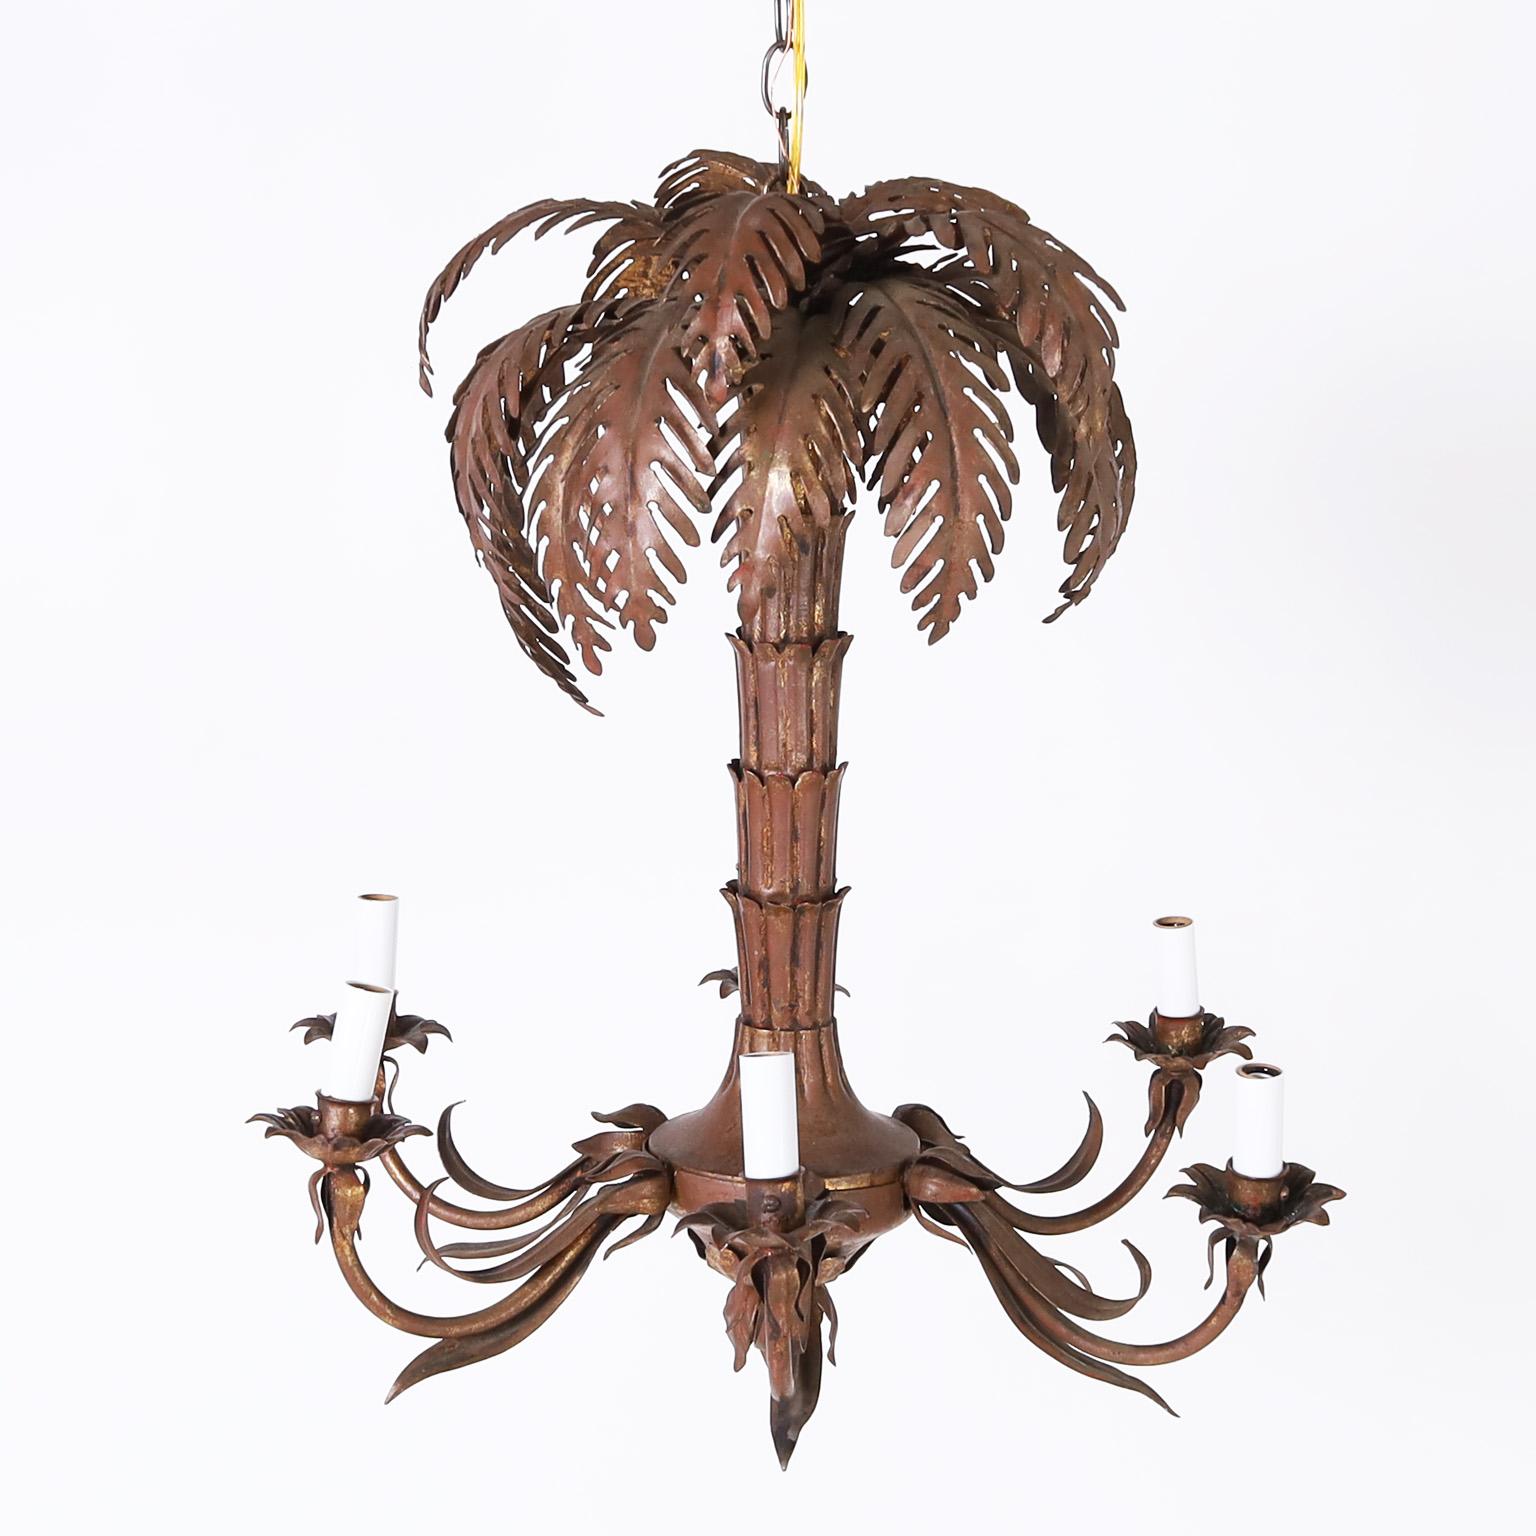 Italian six light chandelier or light fixture crafted in metal with a palm tree top and six arms with acanthus leaves all with an oxidized finish having traces of gold leaf.